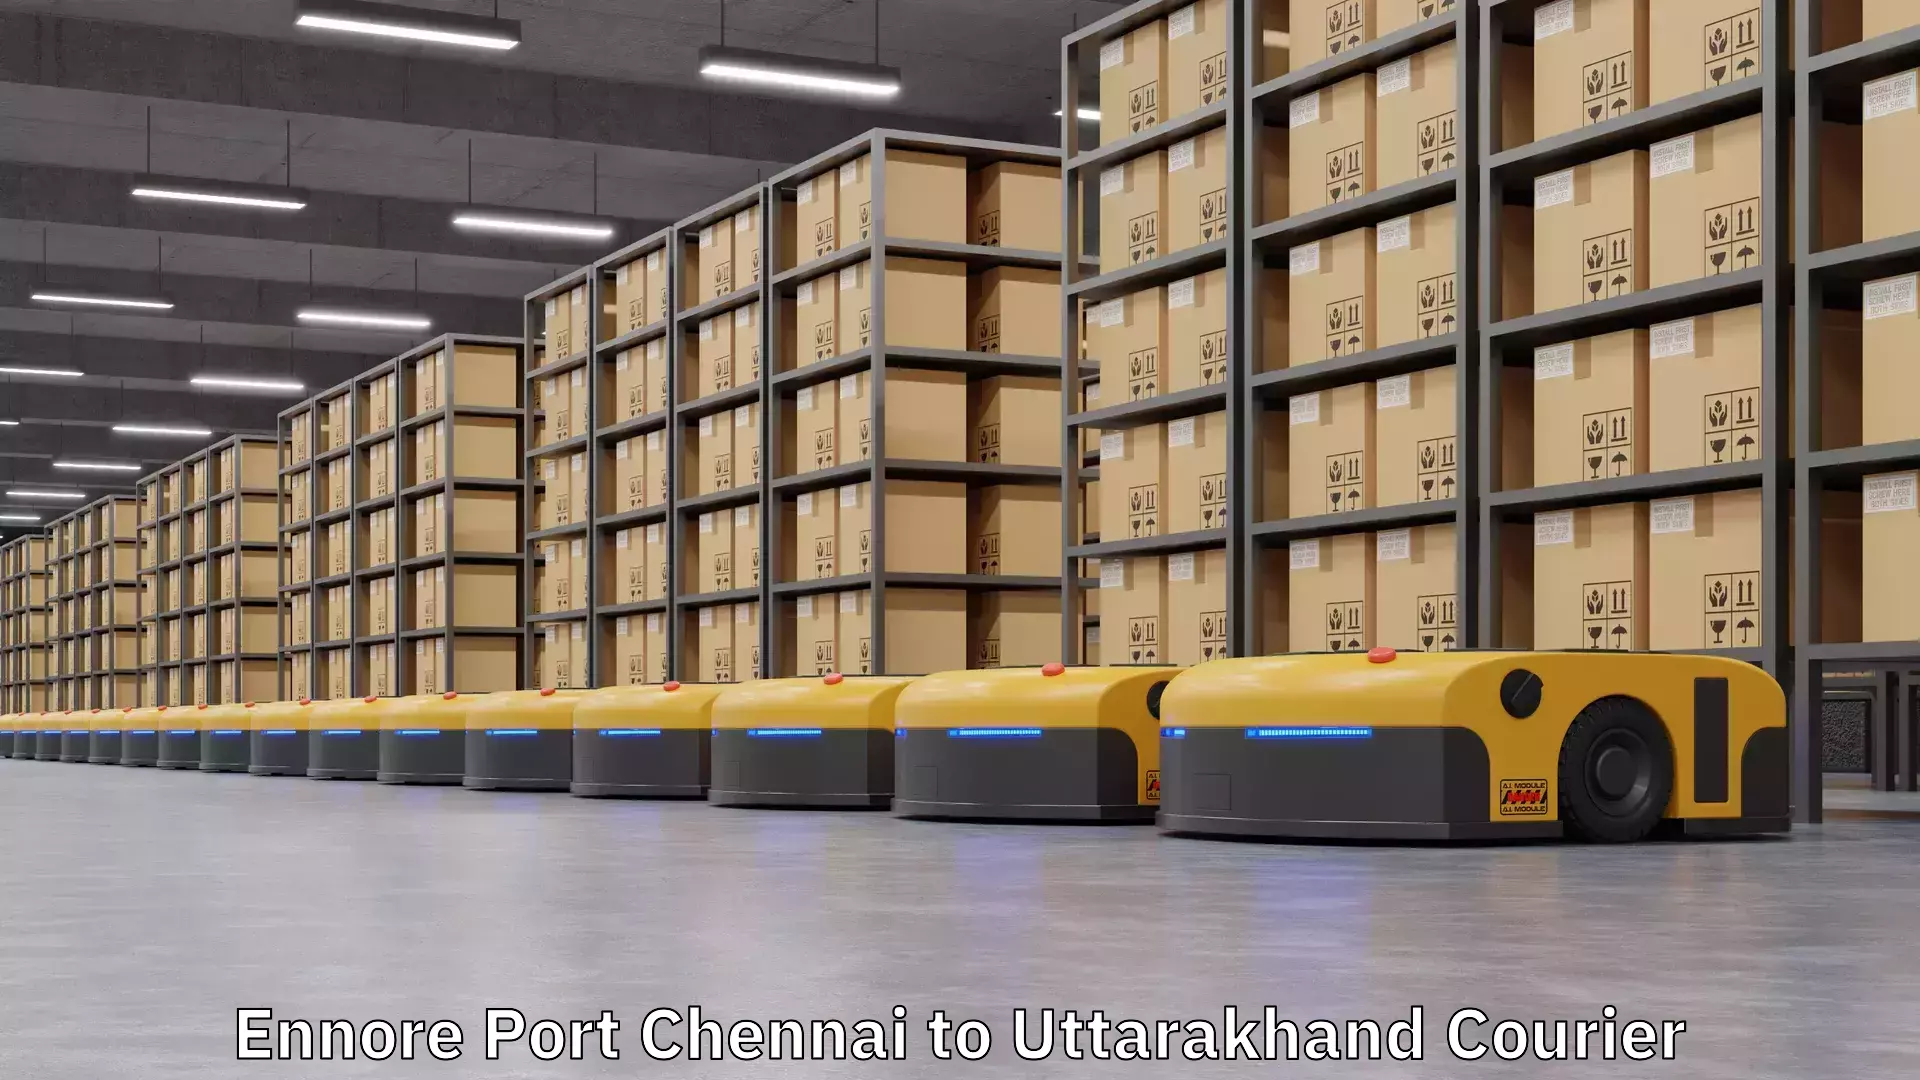 Corporate courier solutions Ennore Port Chennai to Uttarakhand